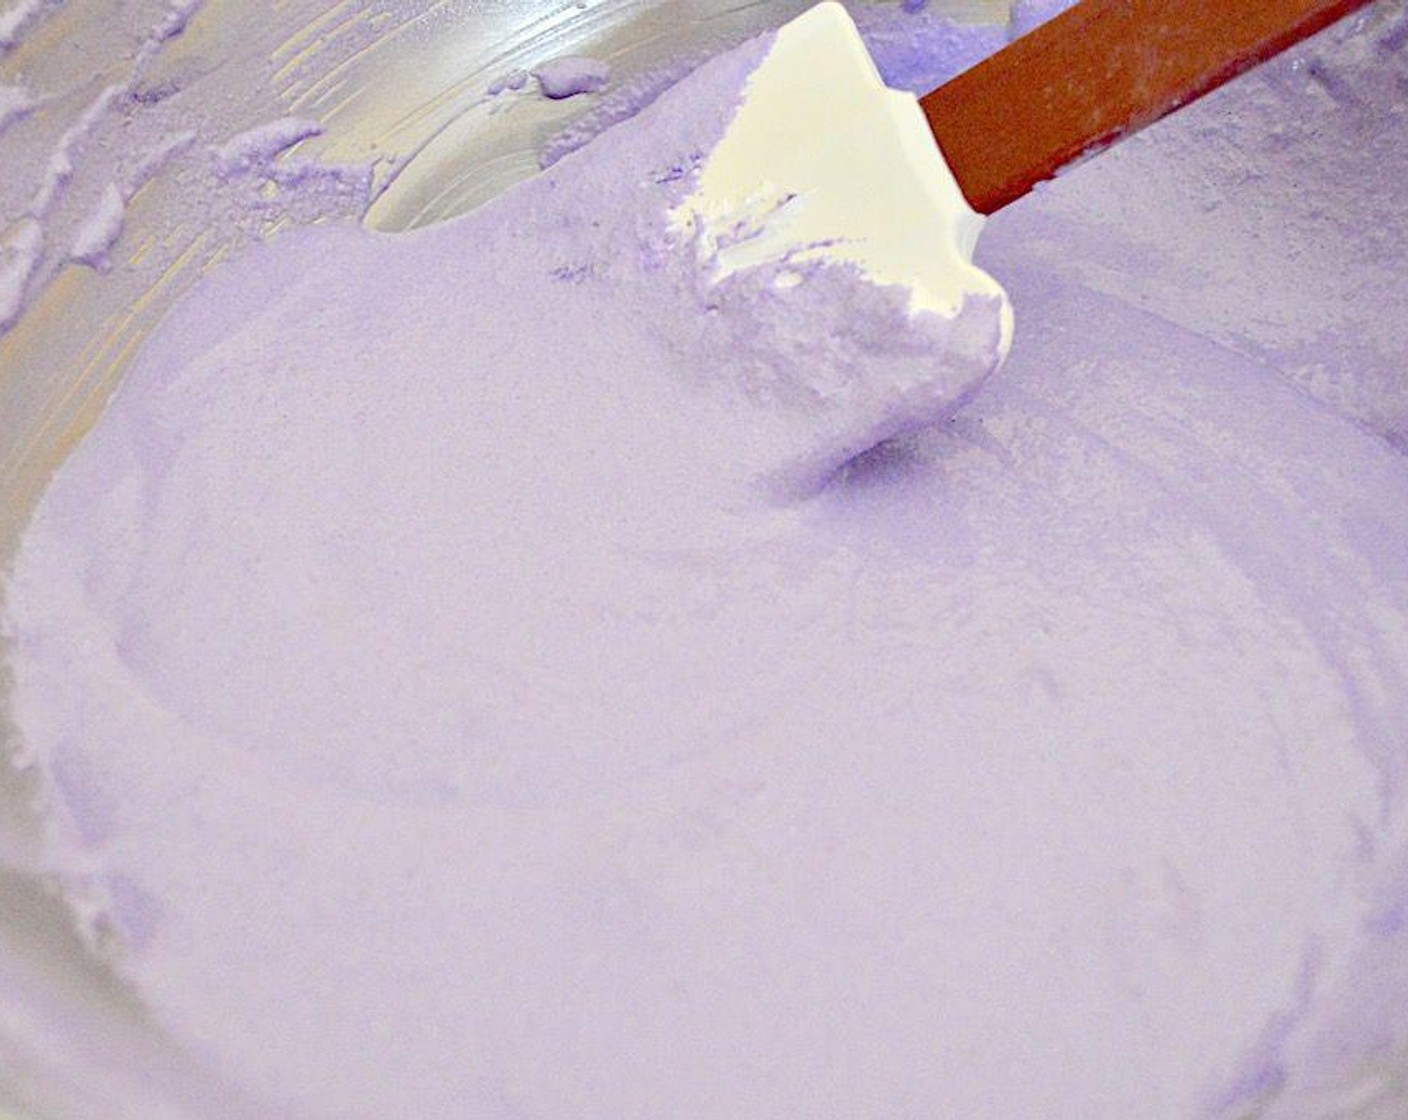 step 2 Whisk them together in the bowl to blend them. Then pour in Eggs (2 1/2) White liquid, the Ground Lavender (1/2 tsp), and Purple Food Coloring (1/2 tsp). Use a spatula to fold and mash the mixture together into a uniform paste. Set the paste aside.